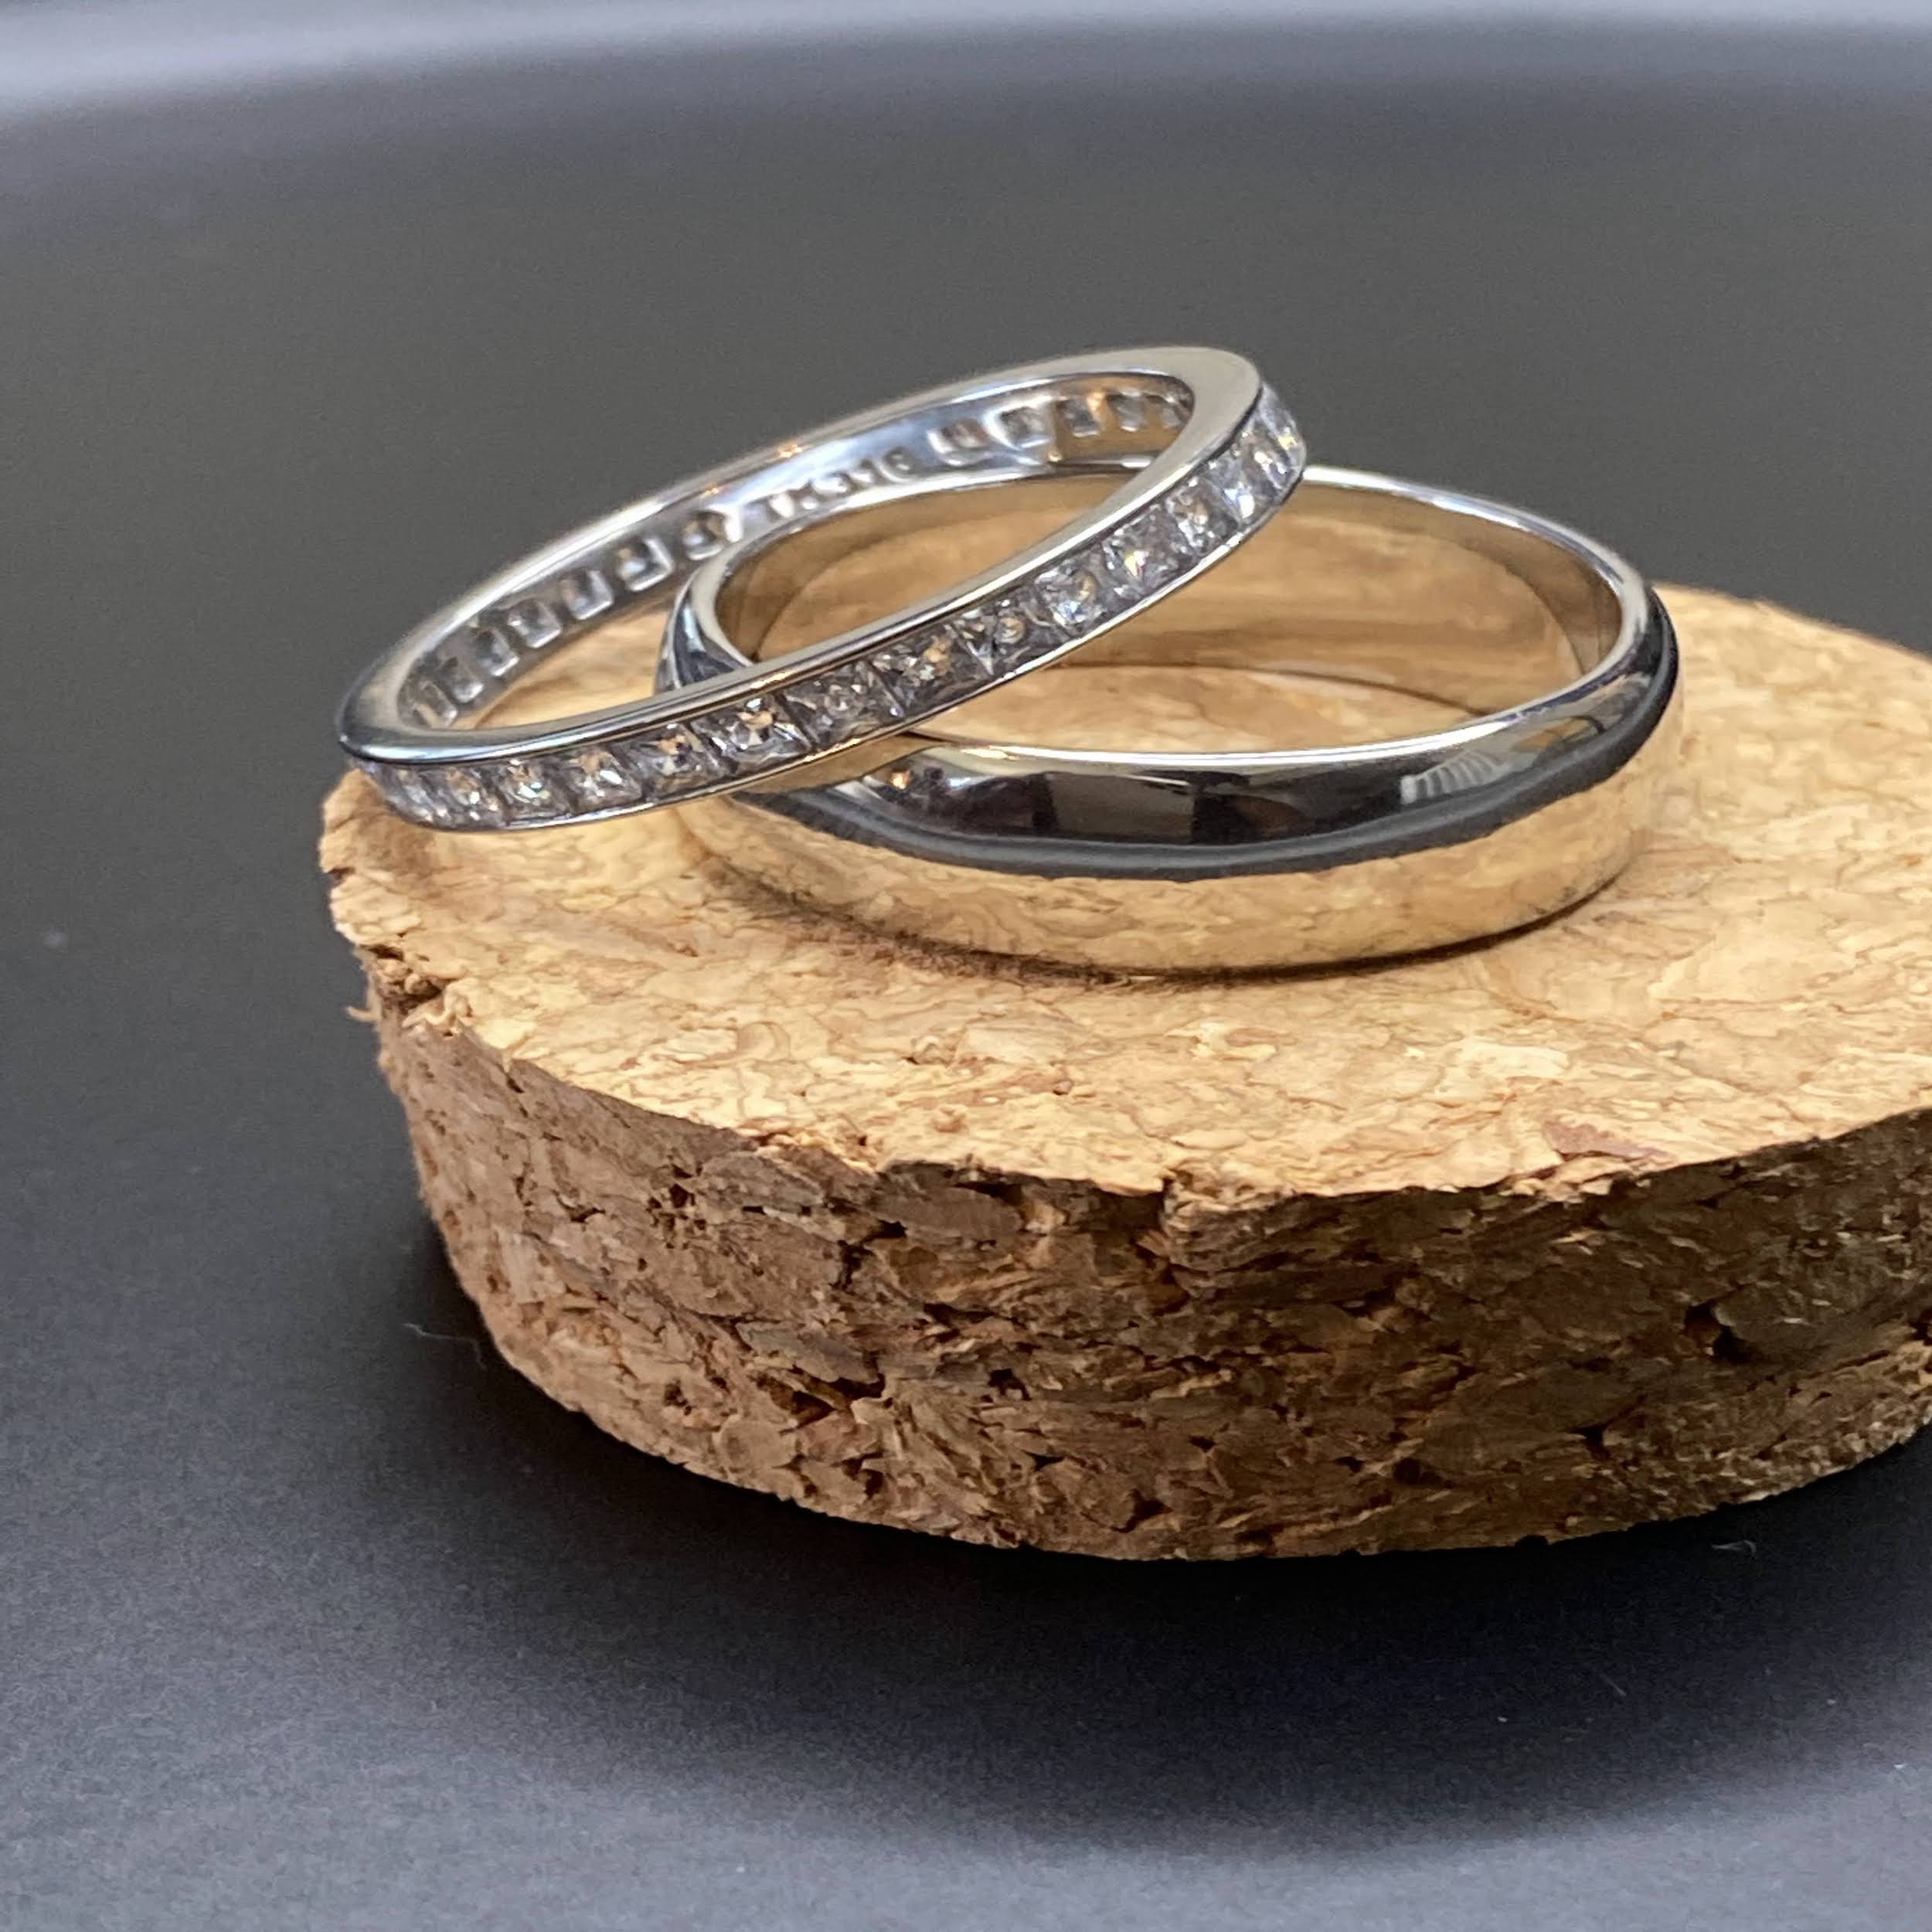 Ring for Fat Fingers: Why Inlay Rings are the Best - Karen Handmade